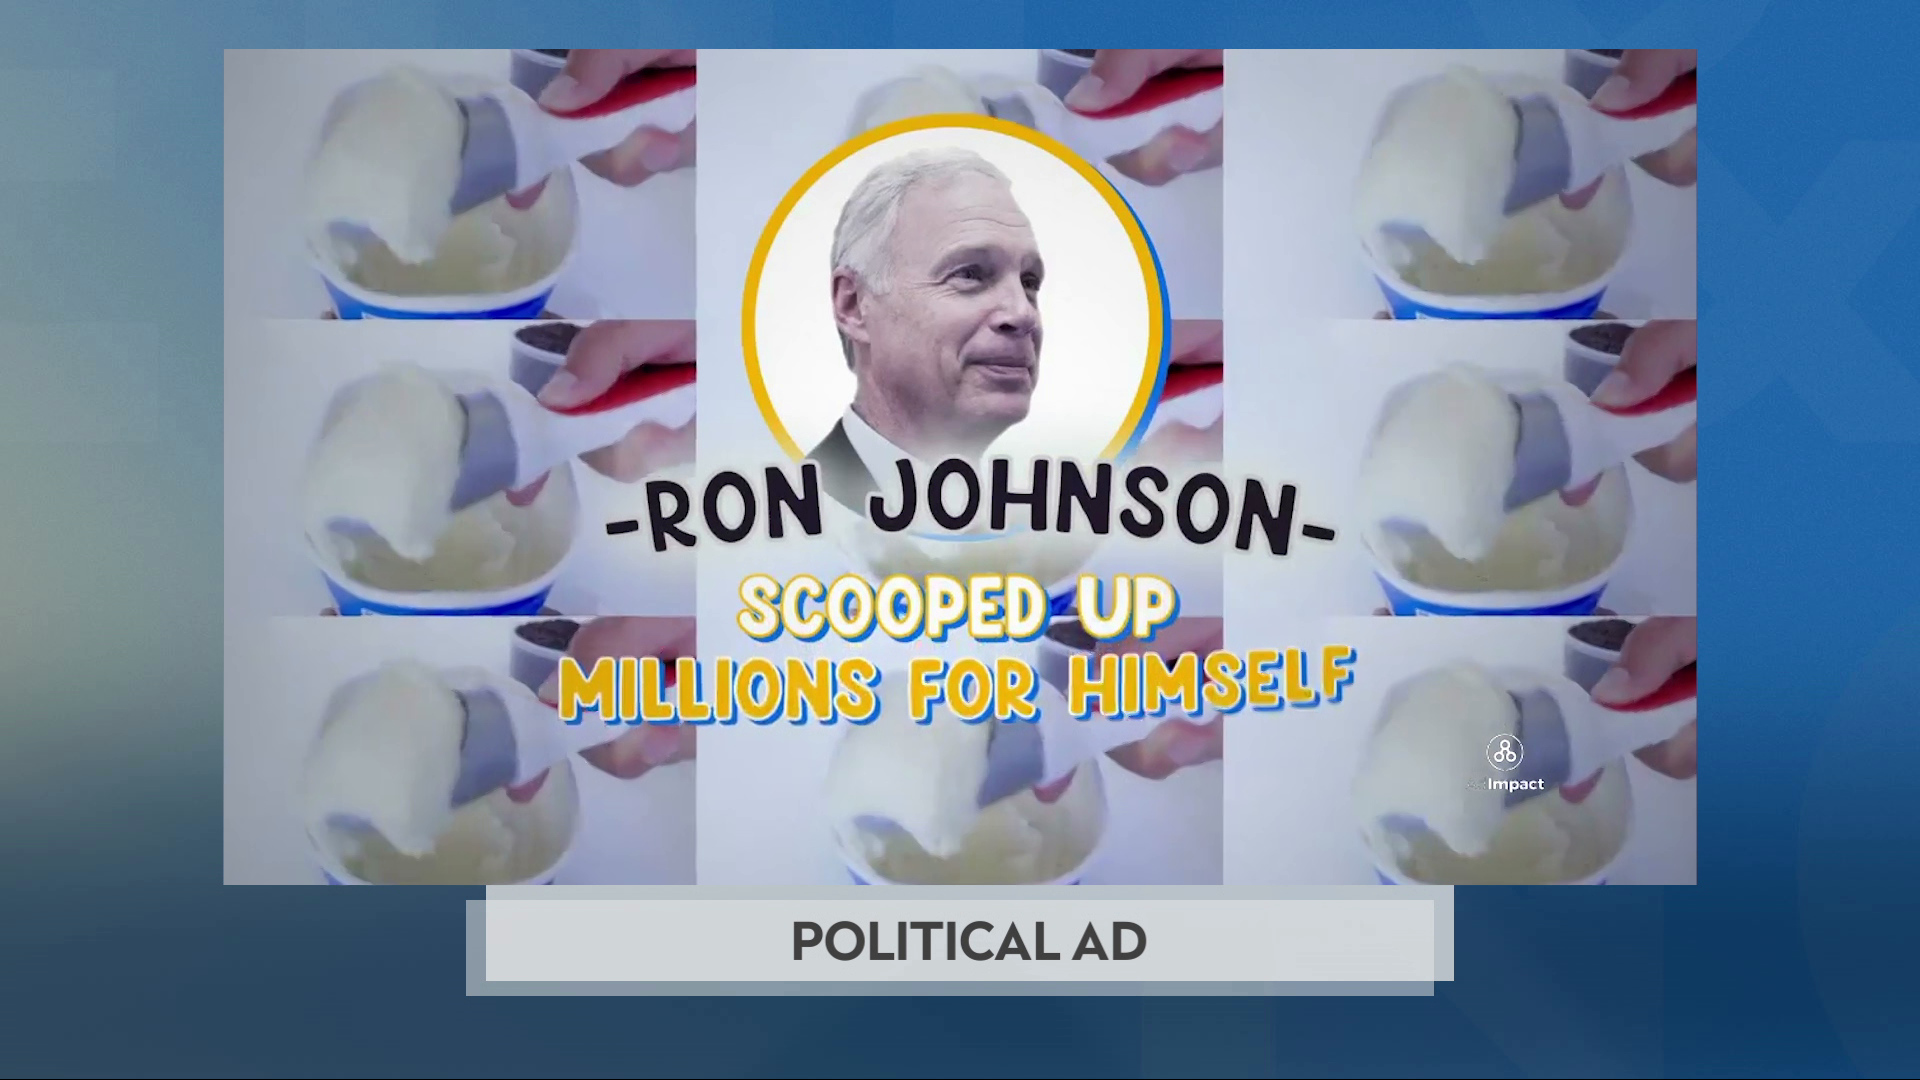 A still image from a political advertisement shows a portrait of Ron Johnson in front of a three-by-three matrix of an image showing a scoop full of ice cream superimposed with the words "Ron Johnson Scooped Up Millions For Himself."